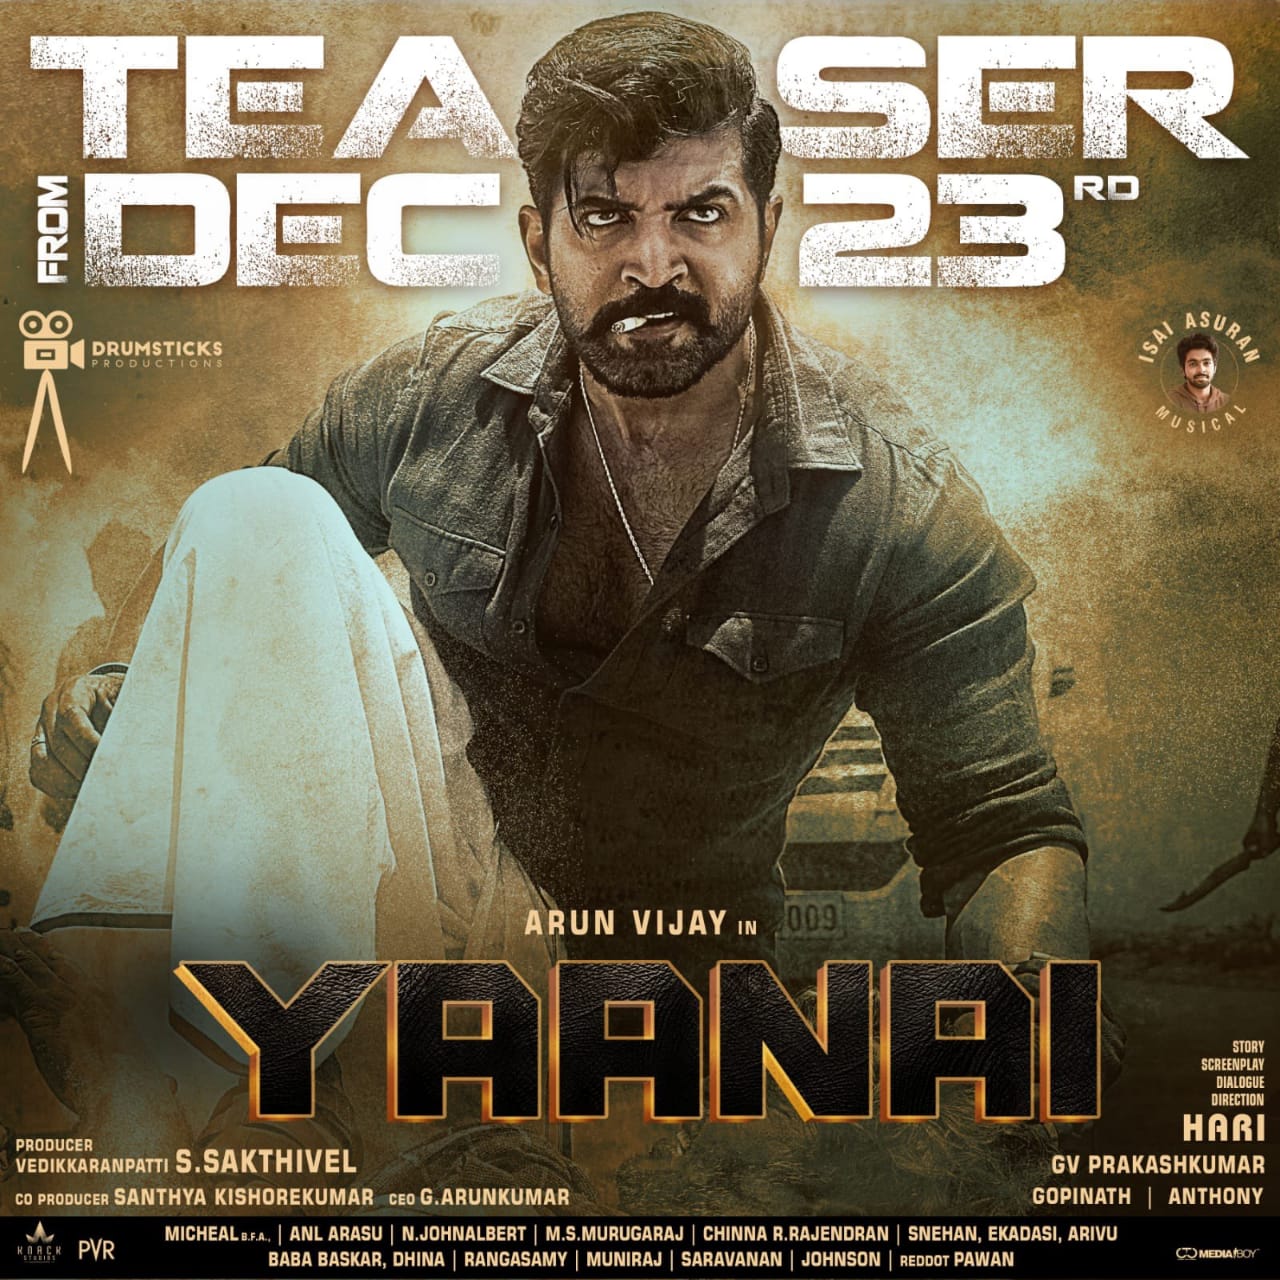 Power packed Teaser of Yaanai to arrive on Dec 23